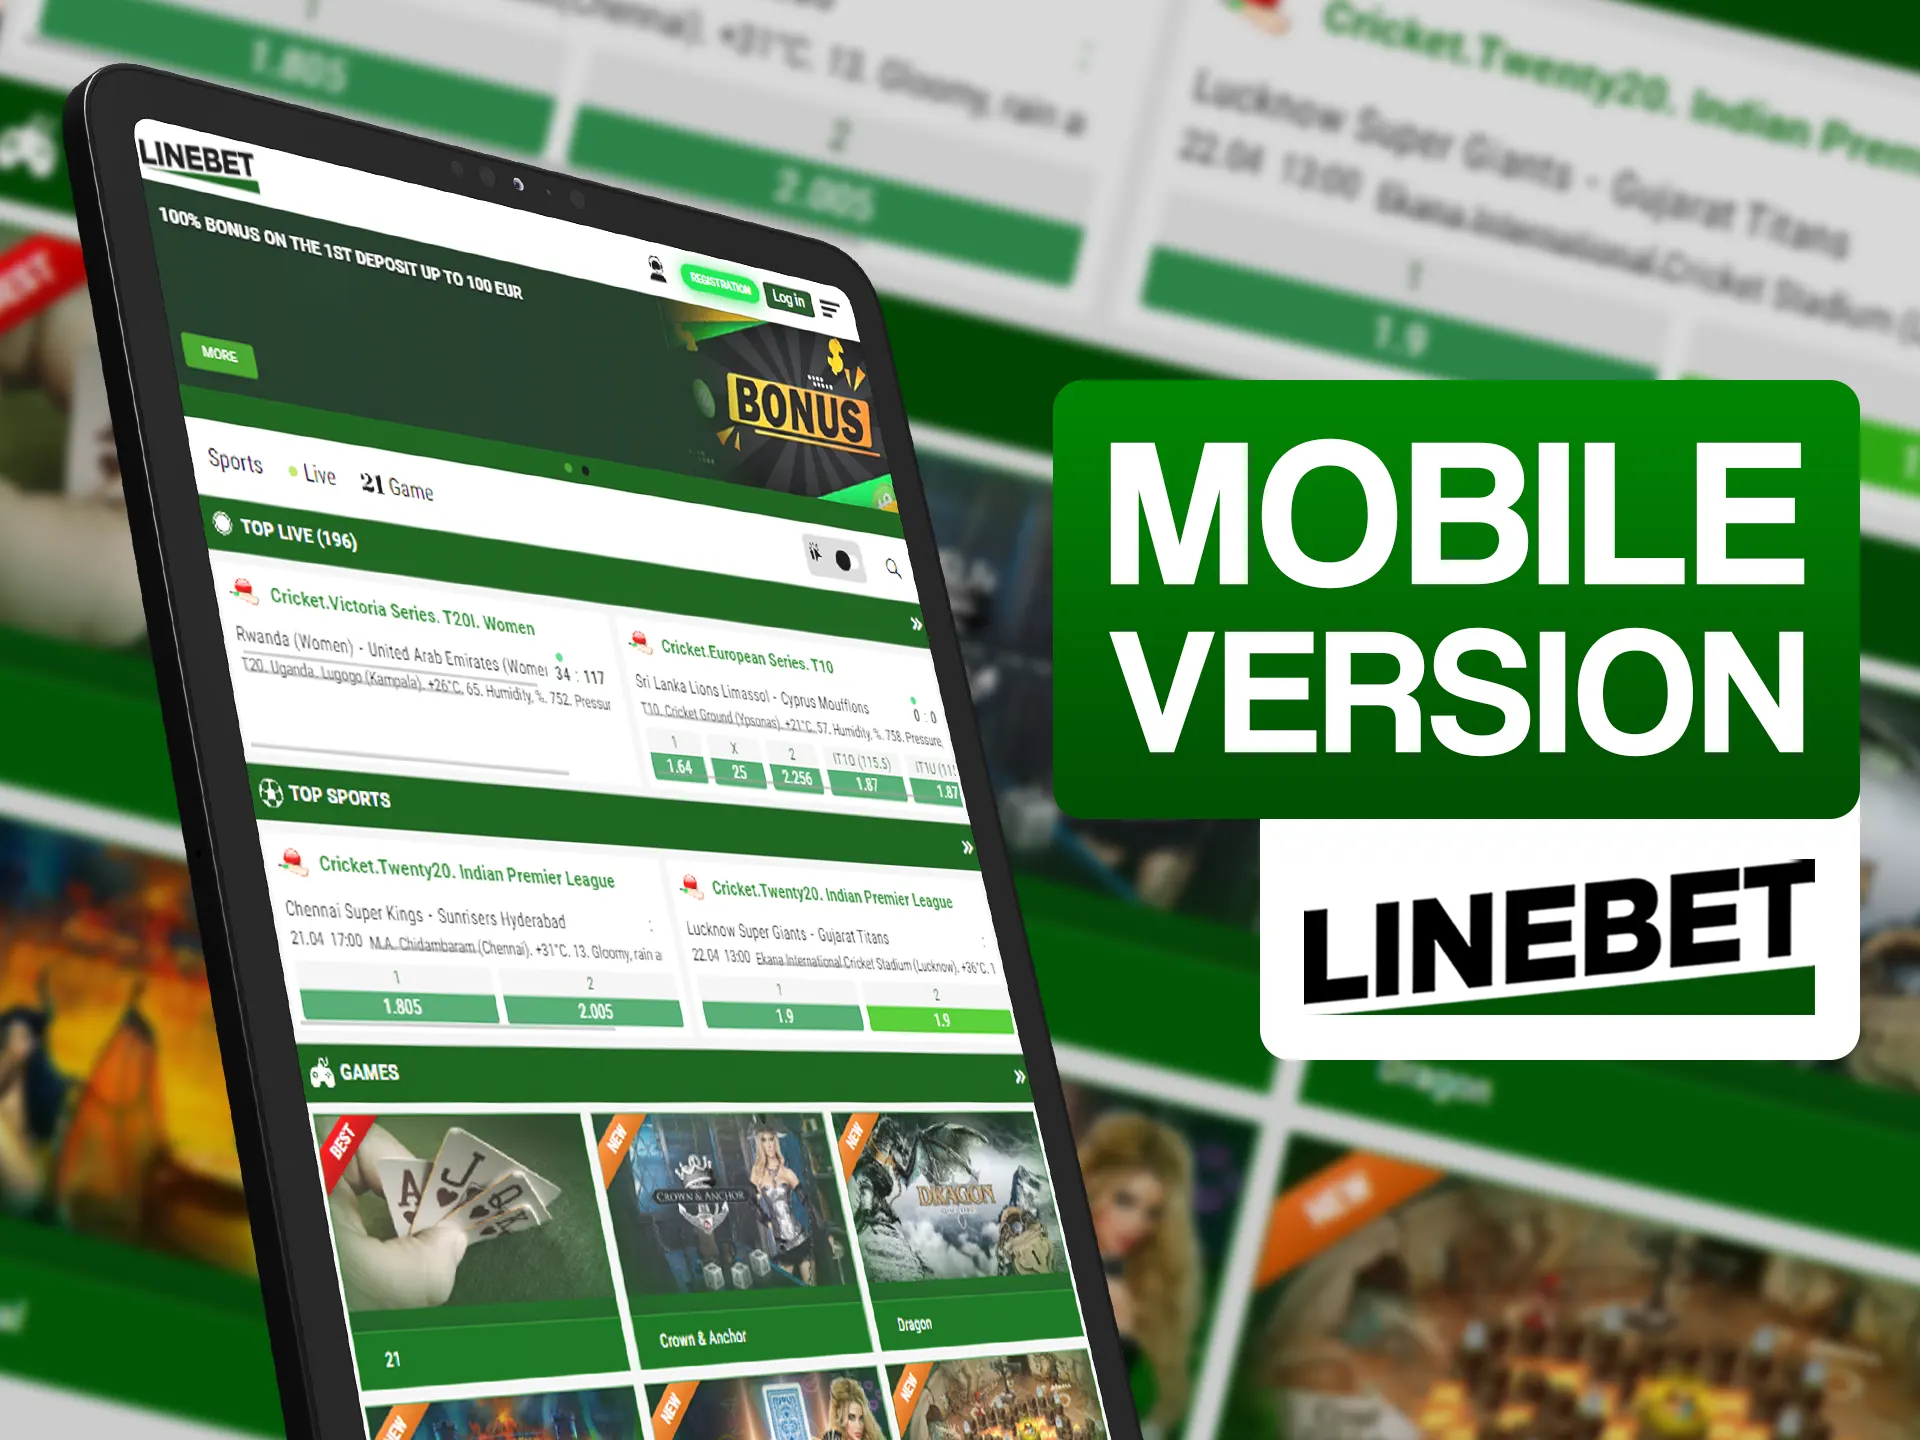 Use mobile version of Linebet app on any device.